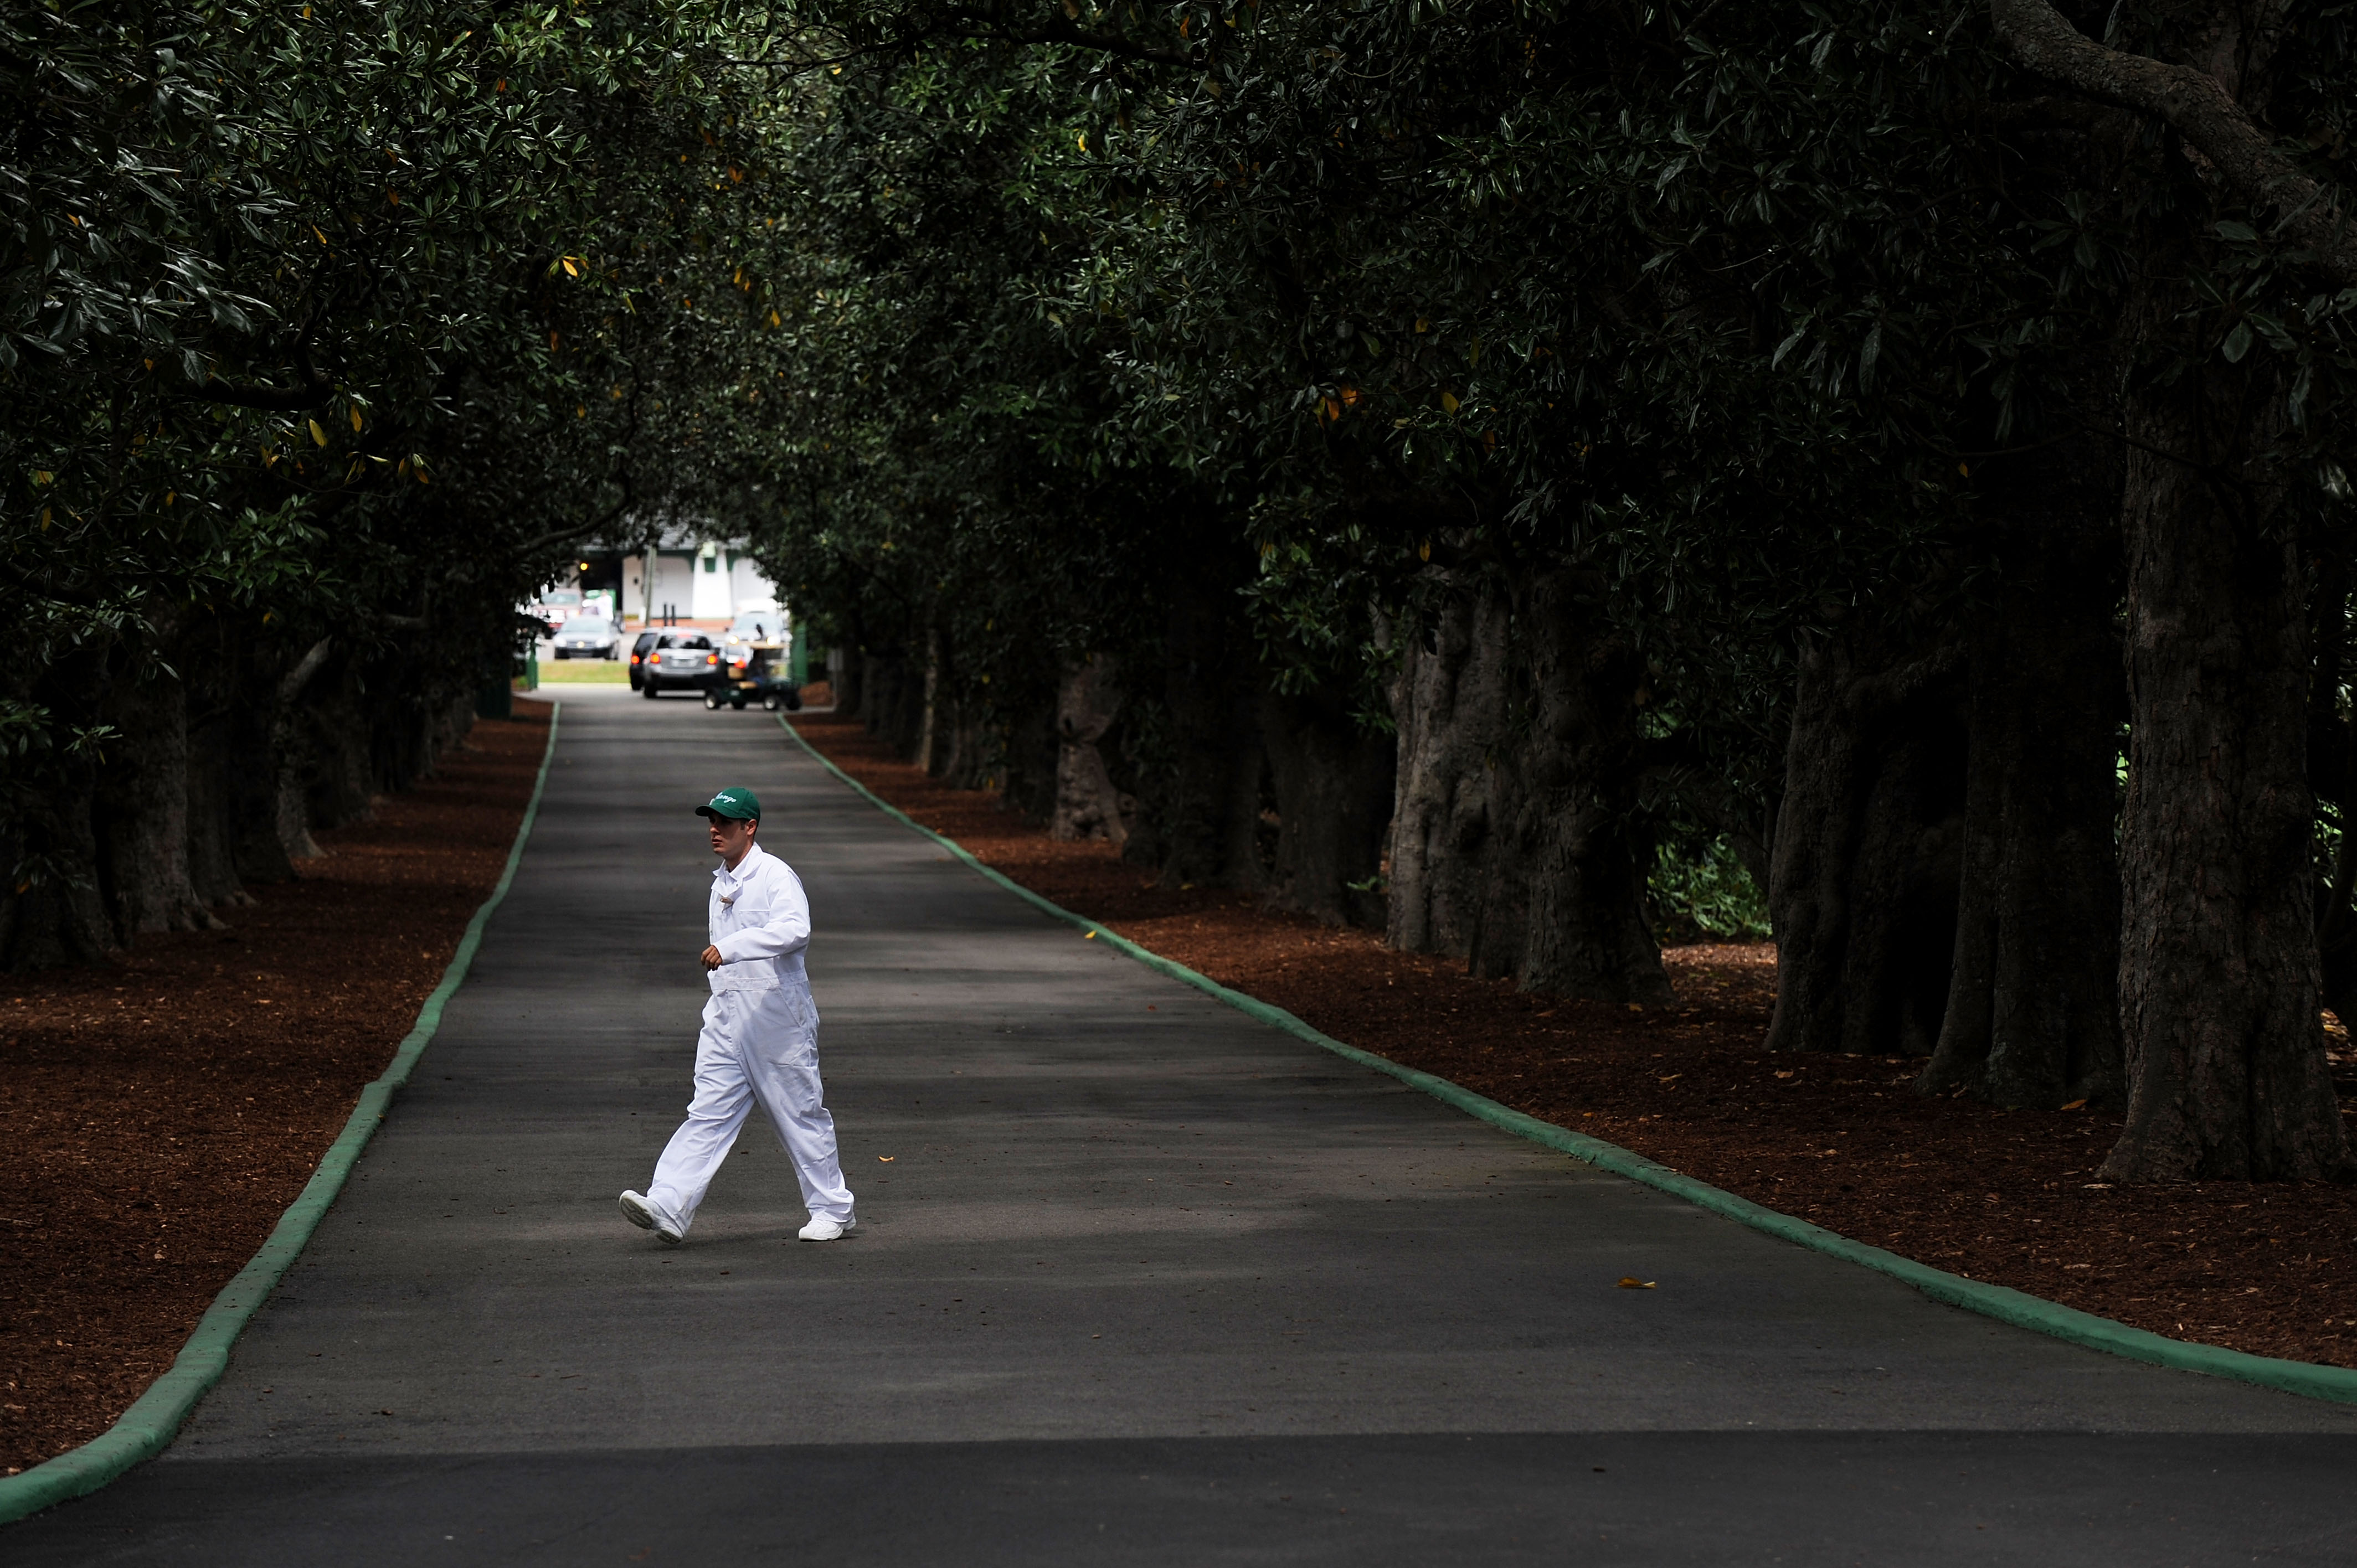 AUGUSTA, GA - APRIL 05:  A caddie crosses Magnolia Lane prior to the 2009 Masters Tournament at Augusta National Golf Club on April 5, 2009 in Augusta, Georgia.  (Photo by Harry How/Getty Images)